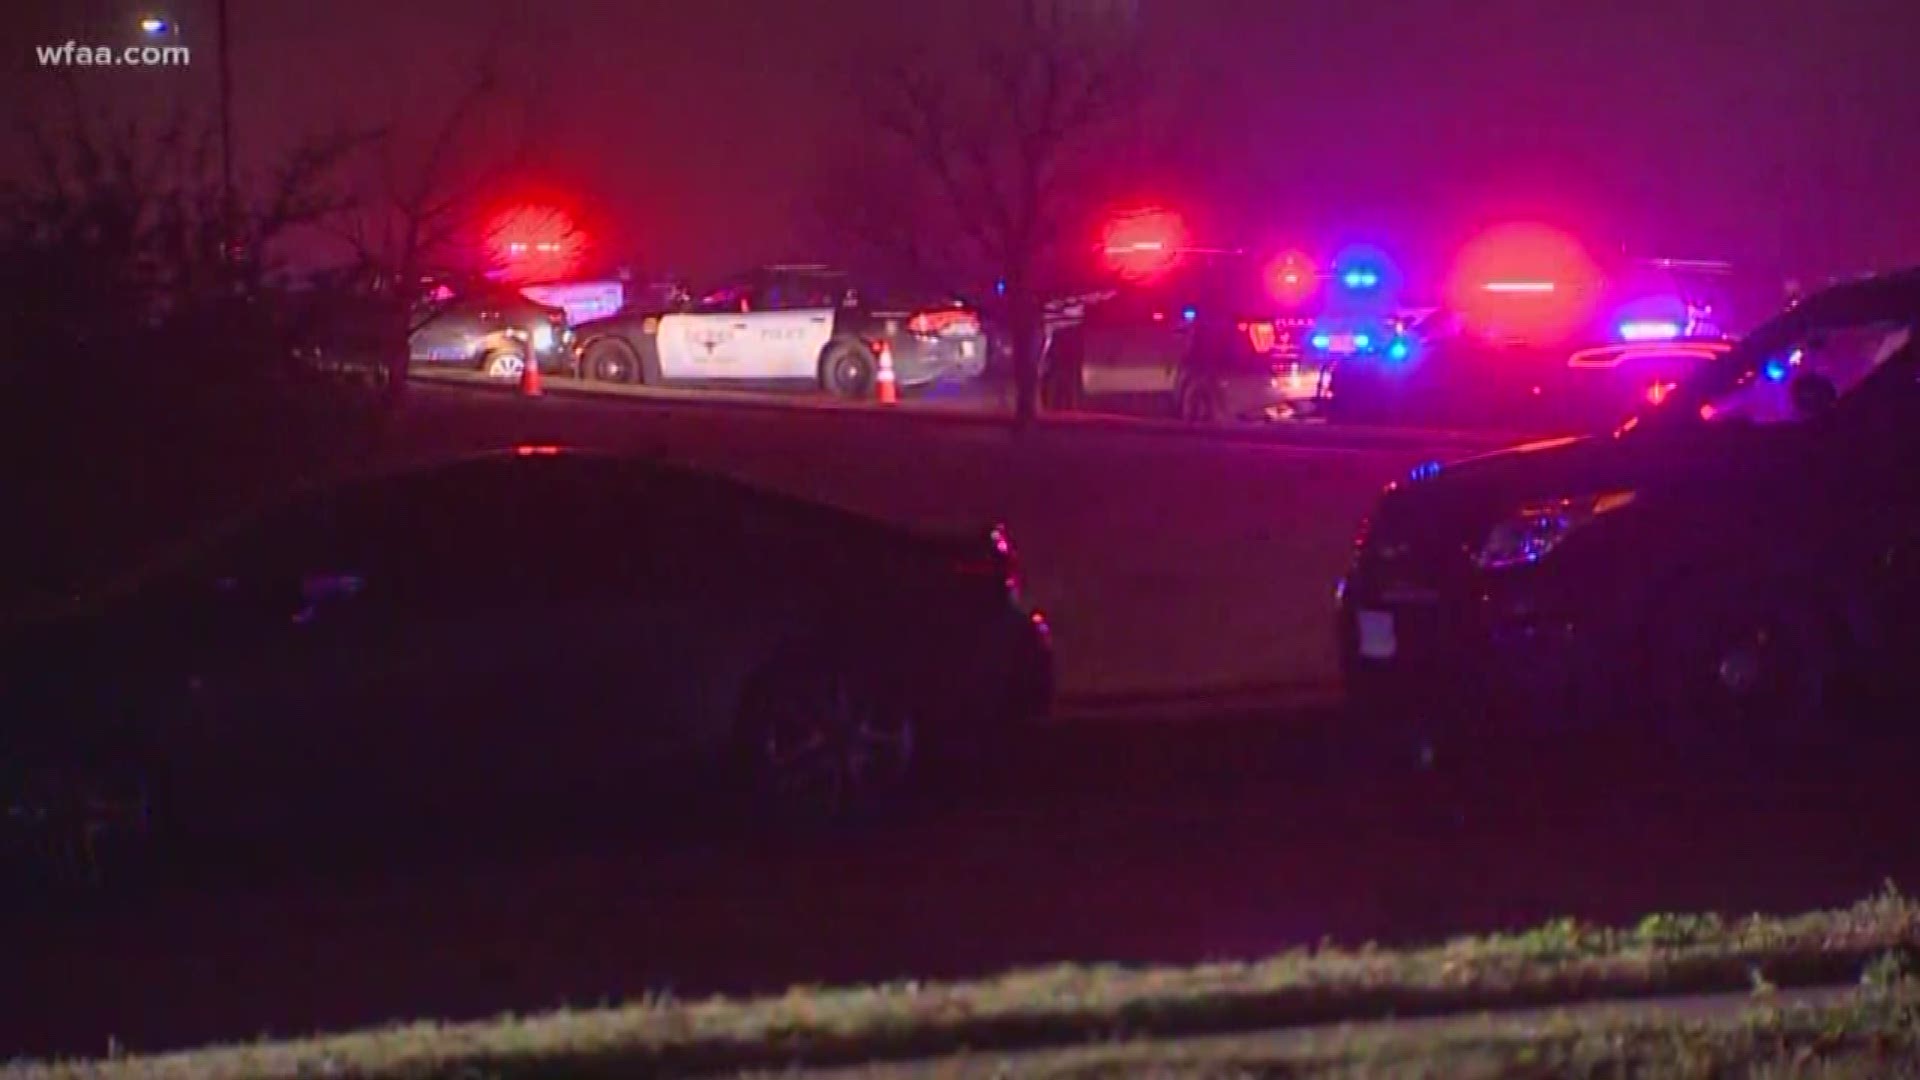 I-35W closed after deadly officer-involved shooting in Fort Worth